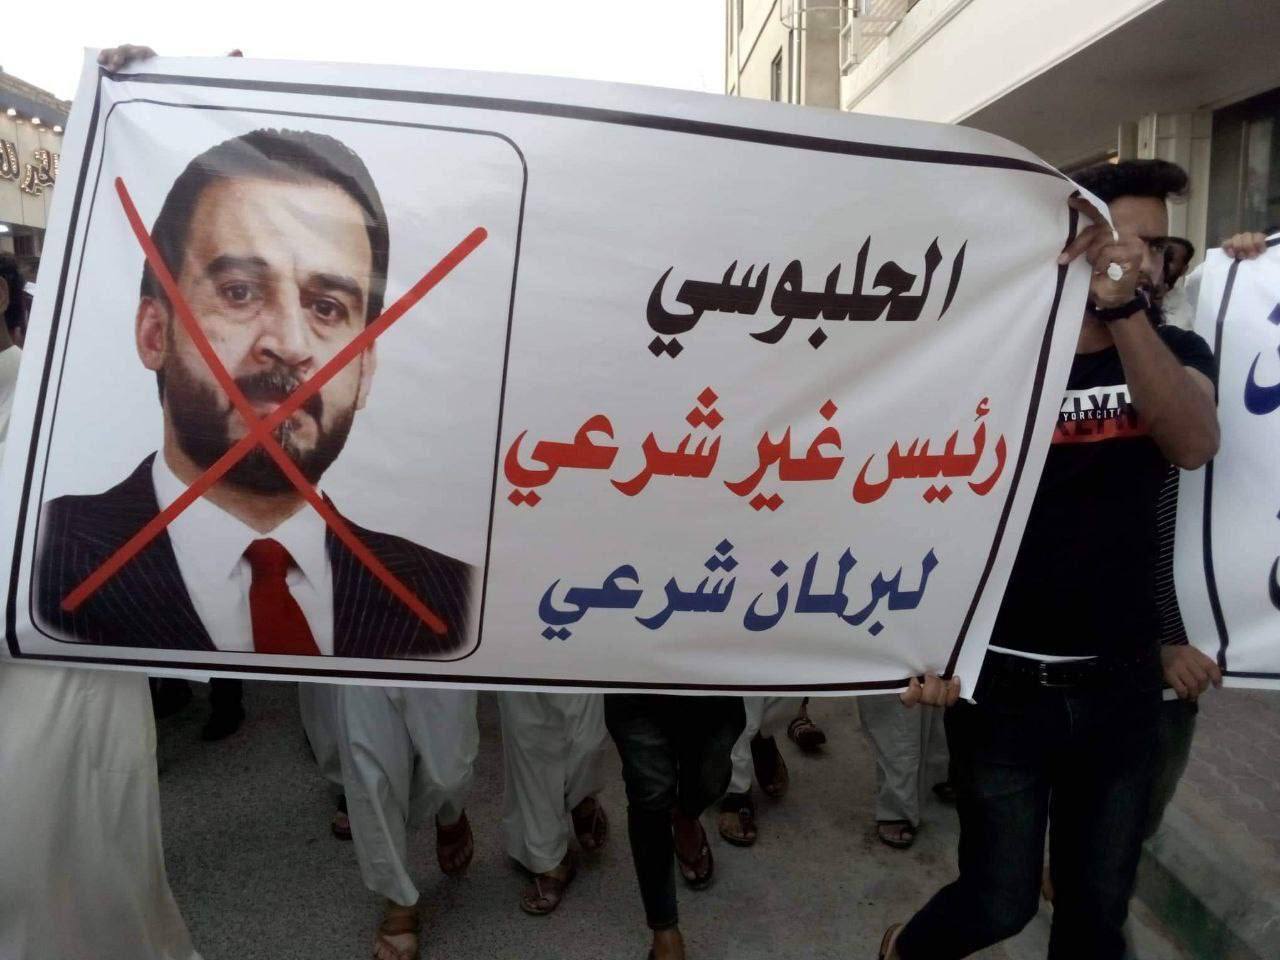 Bassem Khashan supporters in alMuthanna protest alHalboosis measures against him